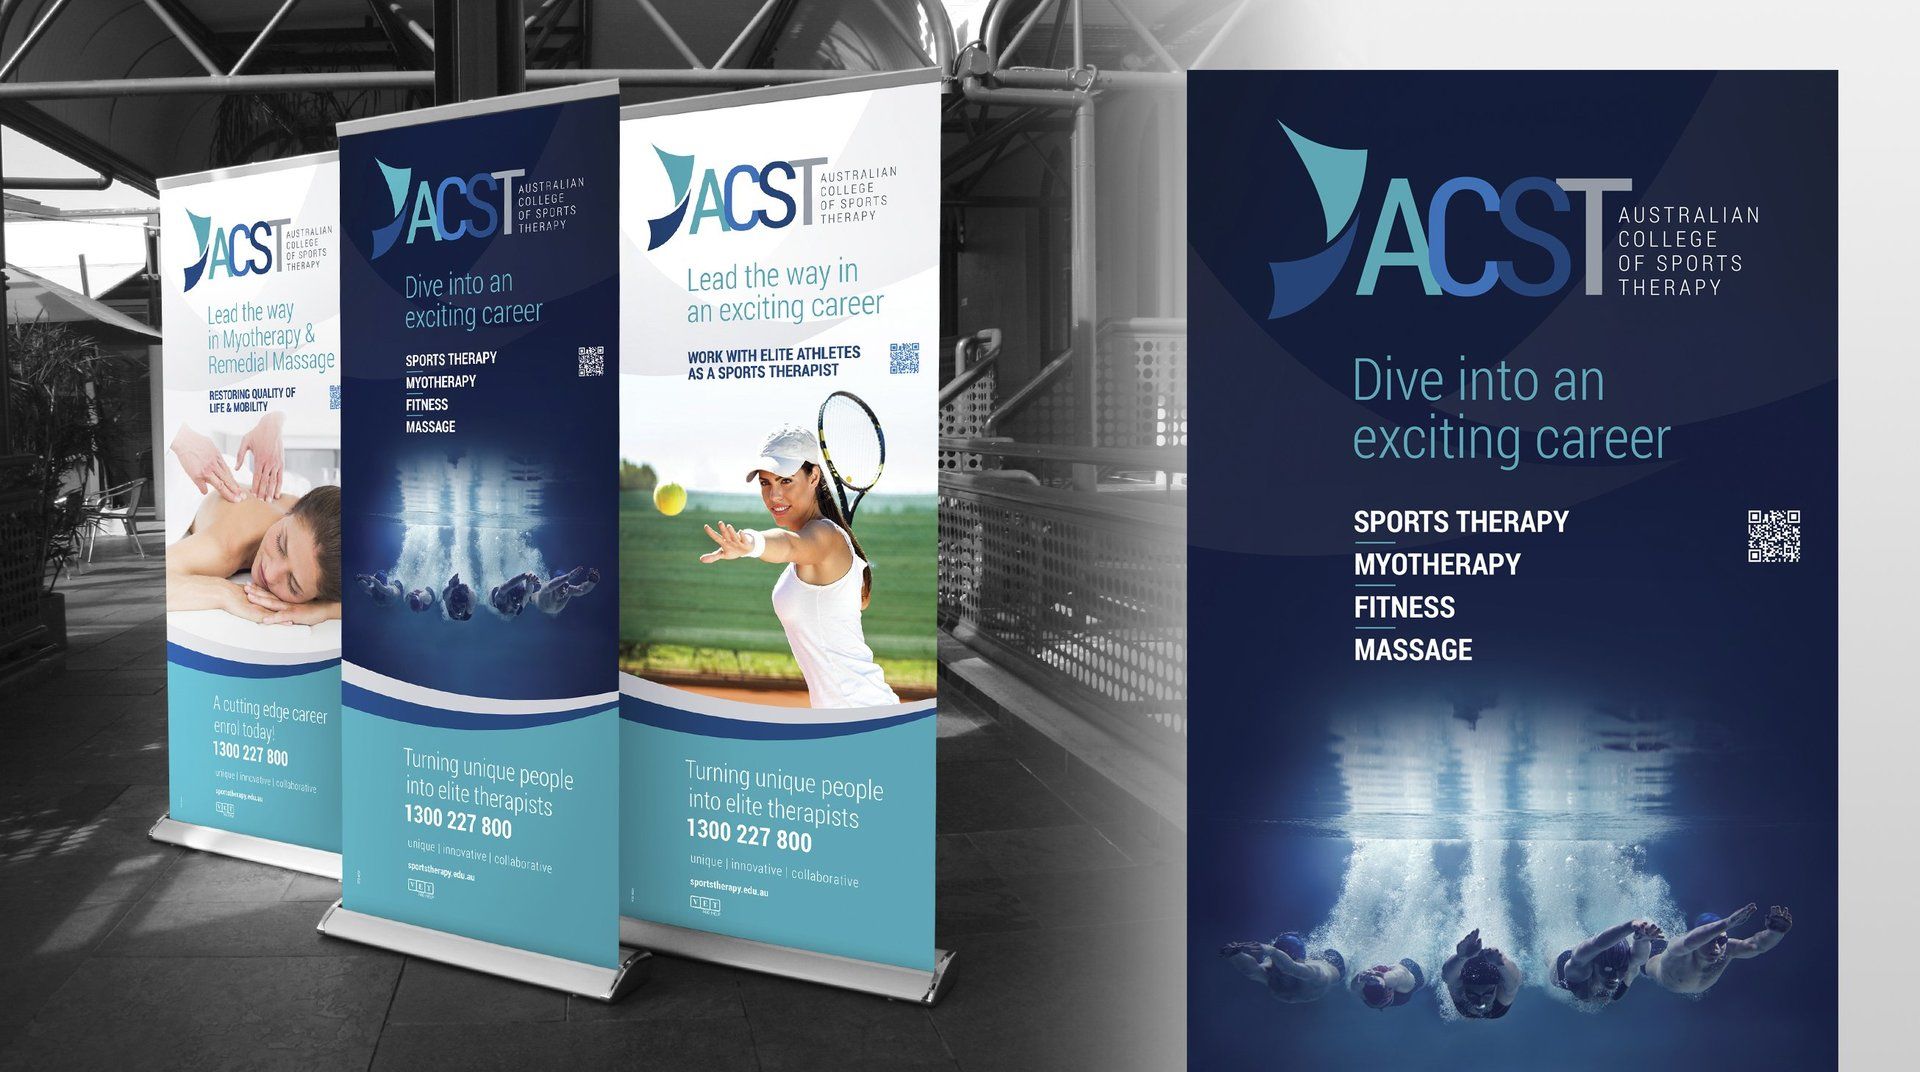 Australian College of Sports Therapy